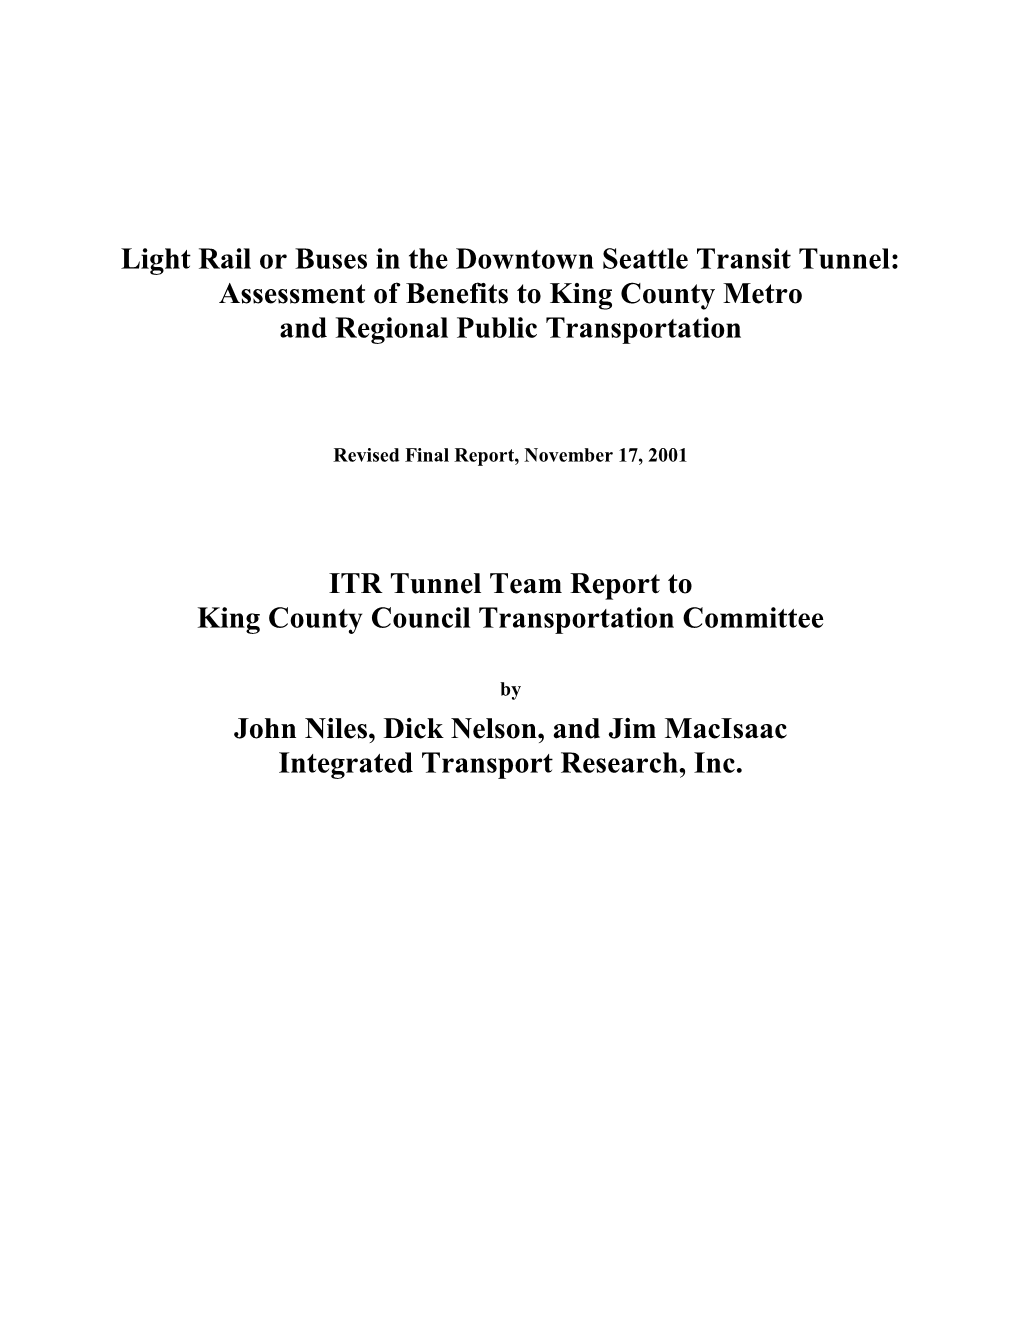 Light Rail Or Buses in the Downtown Seattle Transit Tunnel: Assessment of Benefits to King County Metro and Regional Public Transportation